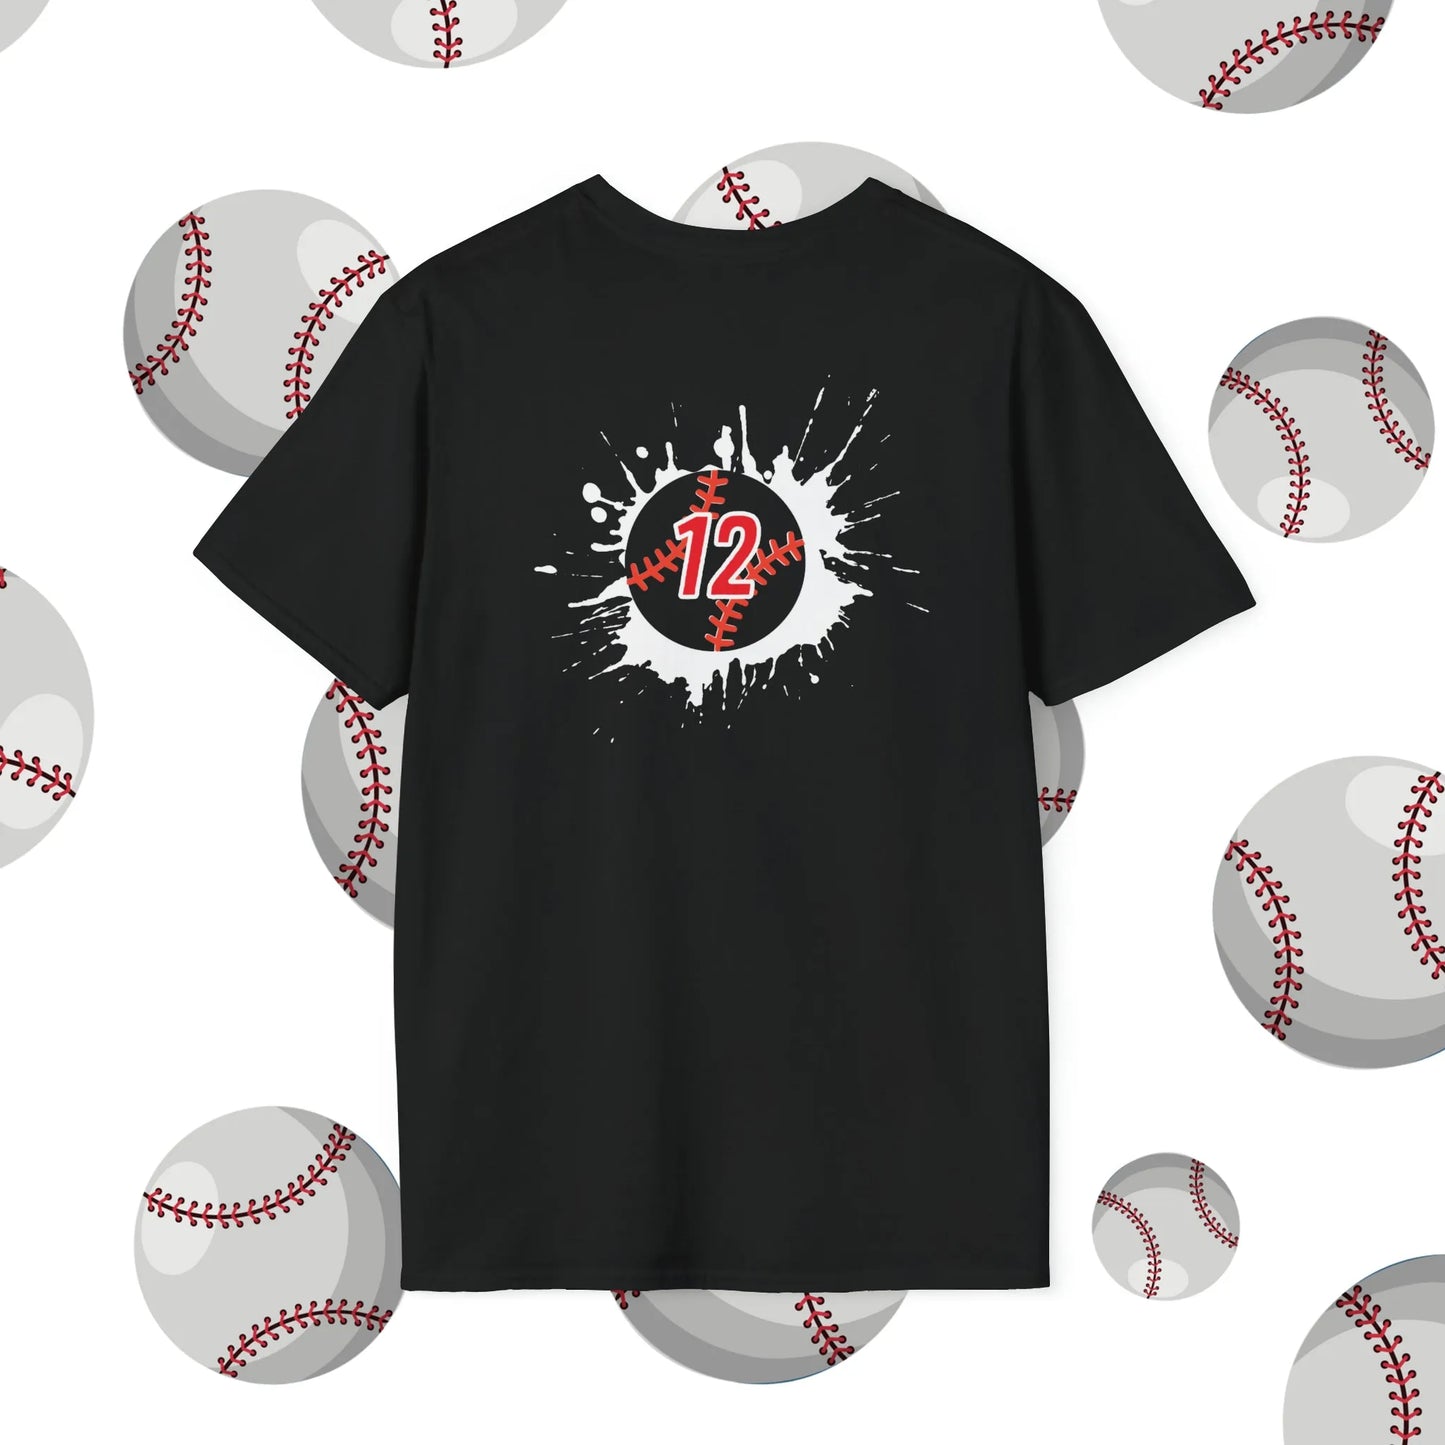 Custom Baseball Brother Shirt - Baseball Brother Player Number Soft-Style T-Shirt - Personalized Baseball Brother Shirt